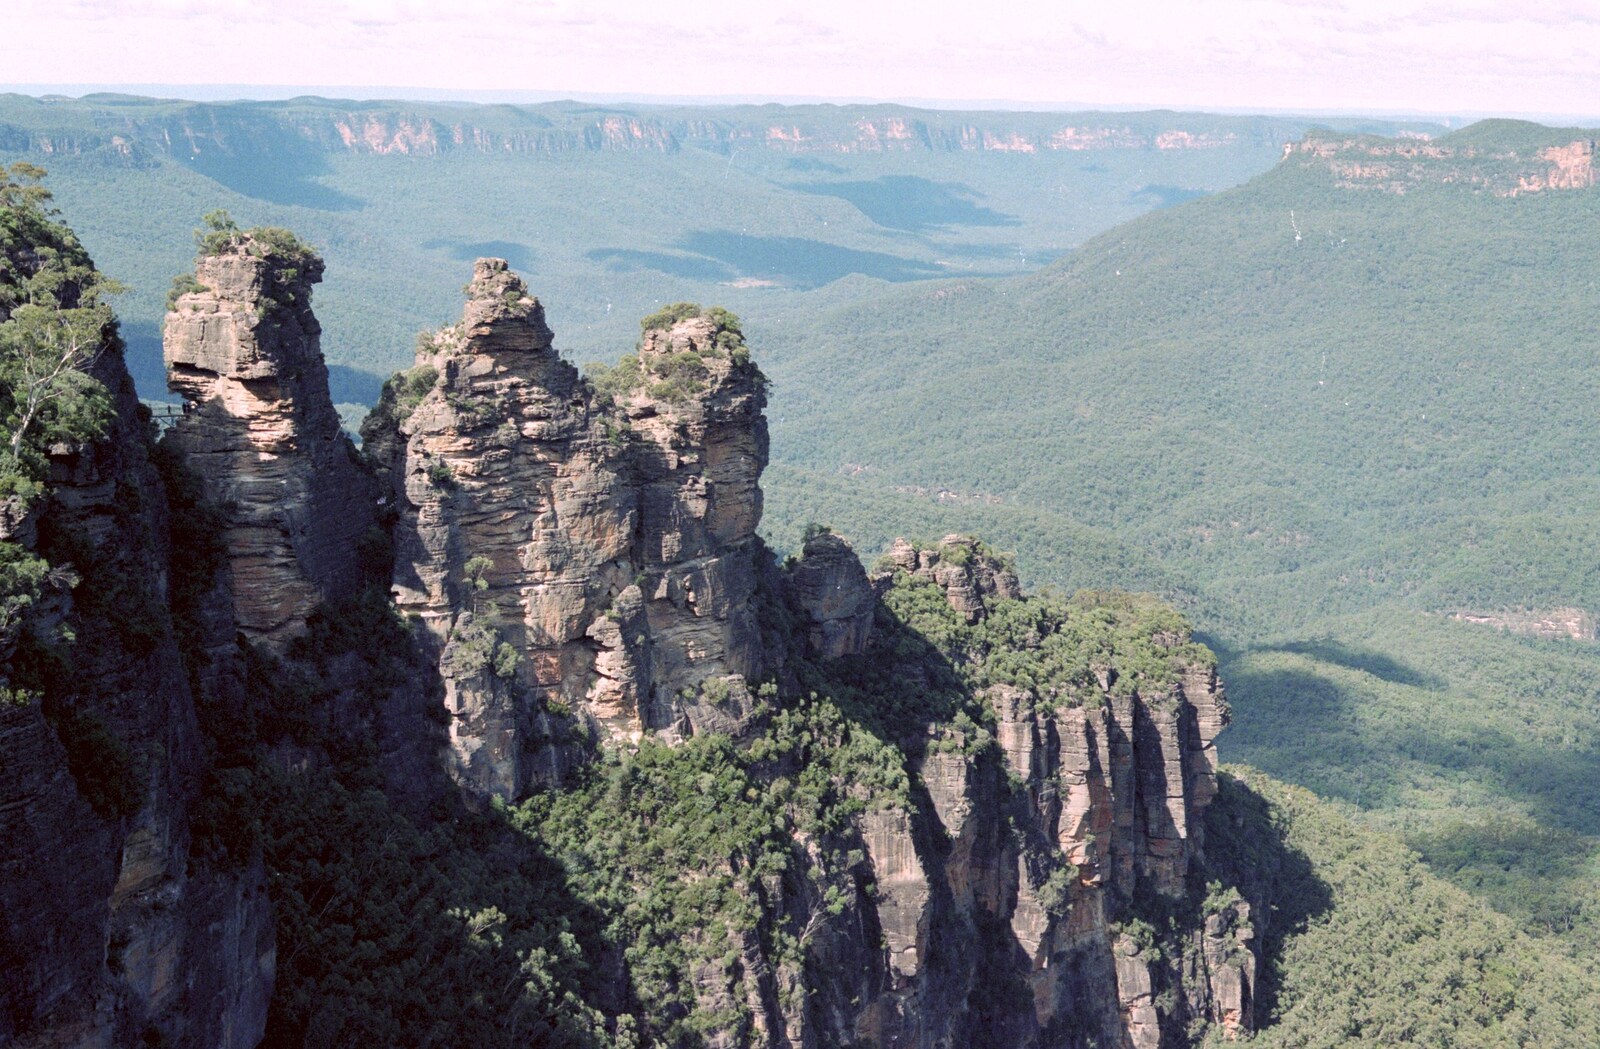 The Three Sisters in the Blue Mountains from A Trip to the Blue Mountains, New South Wales, Australia - 12th April 2000